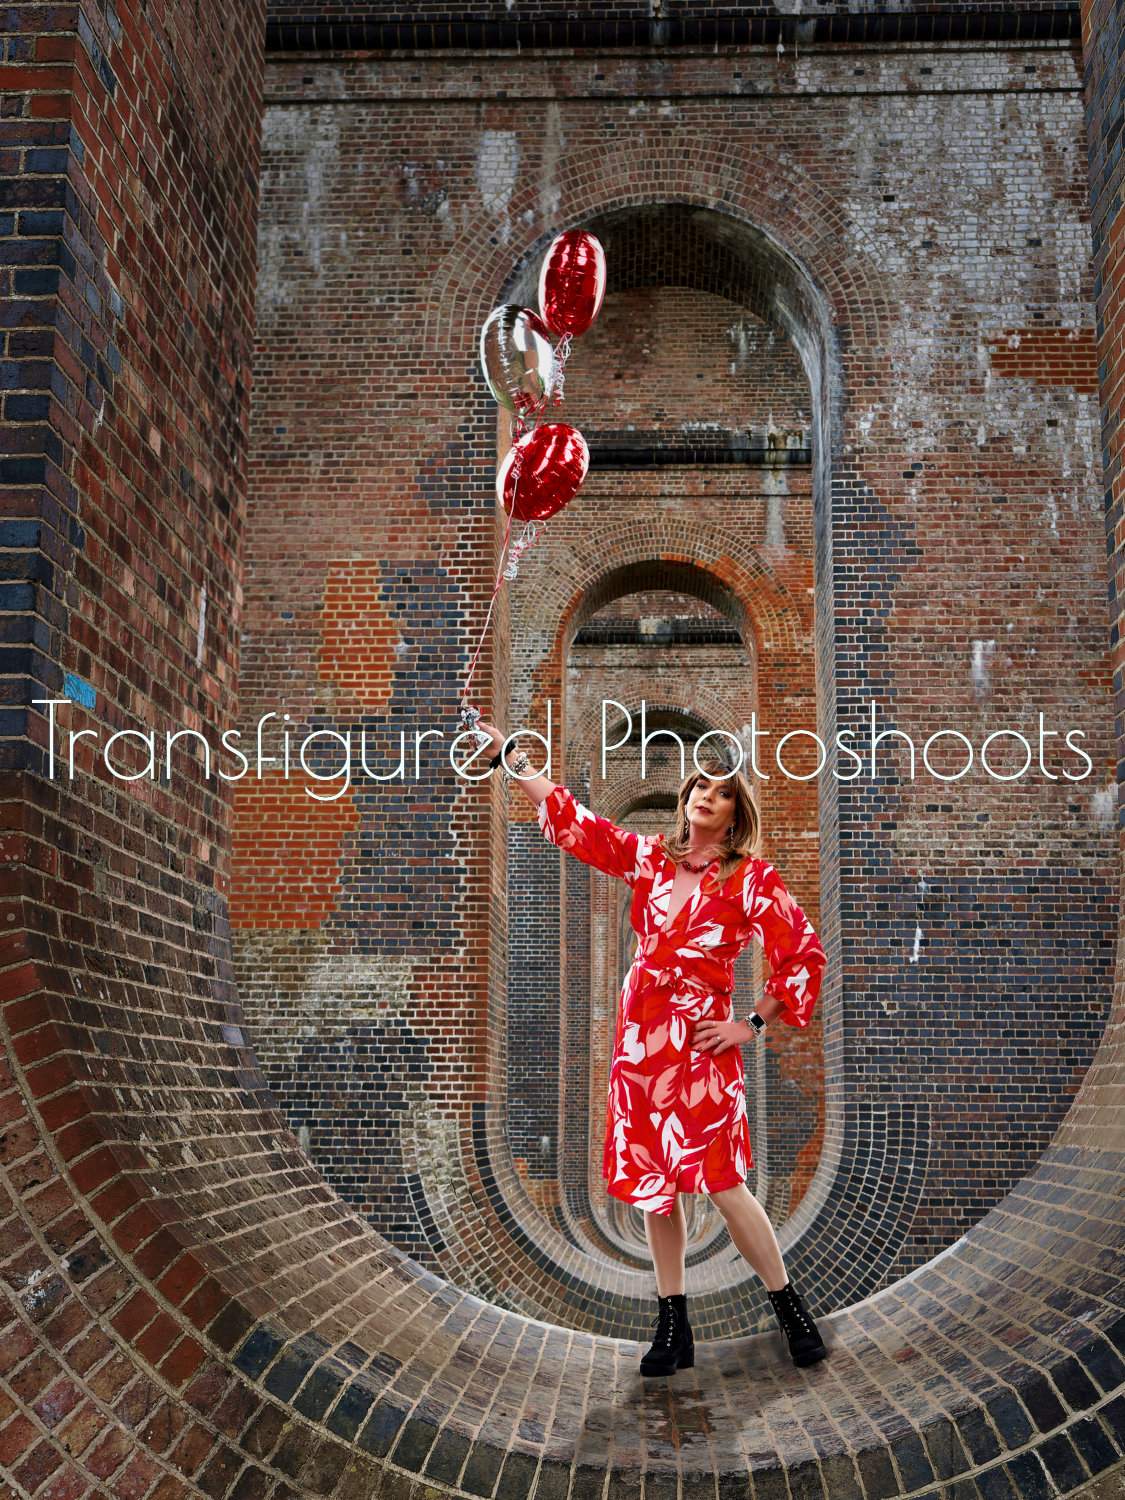 Berndette poses under the viaduct with balloons